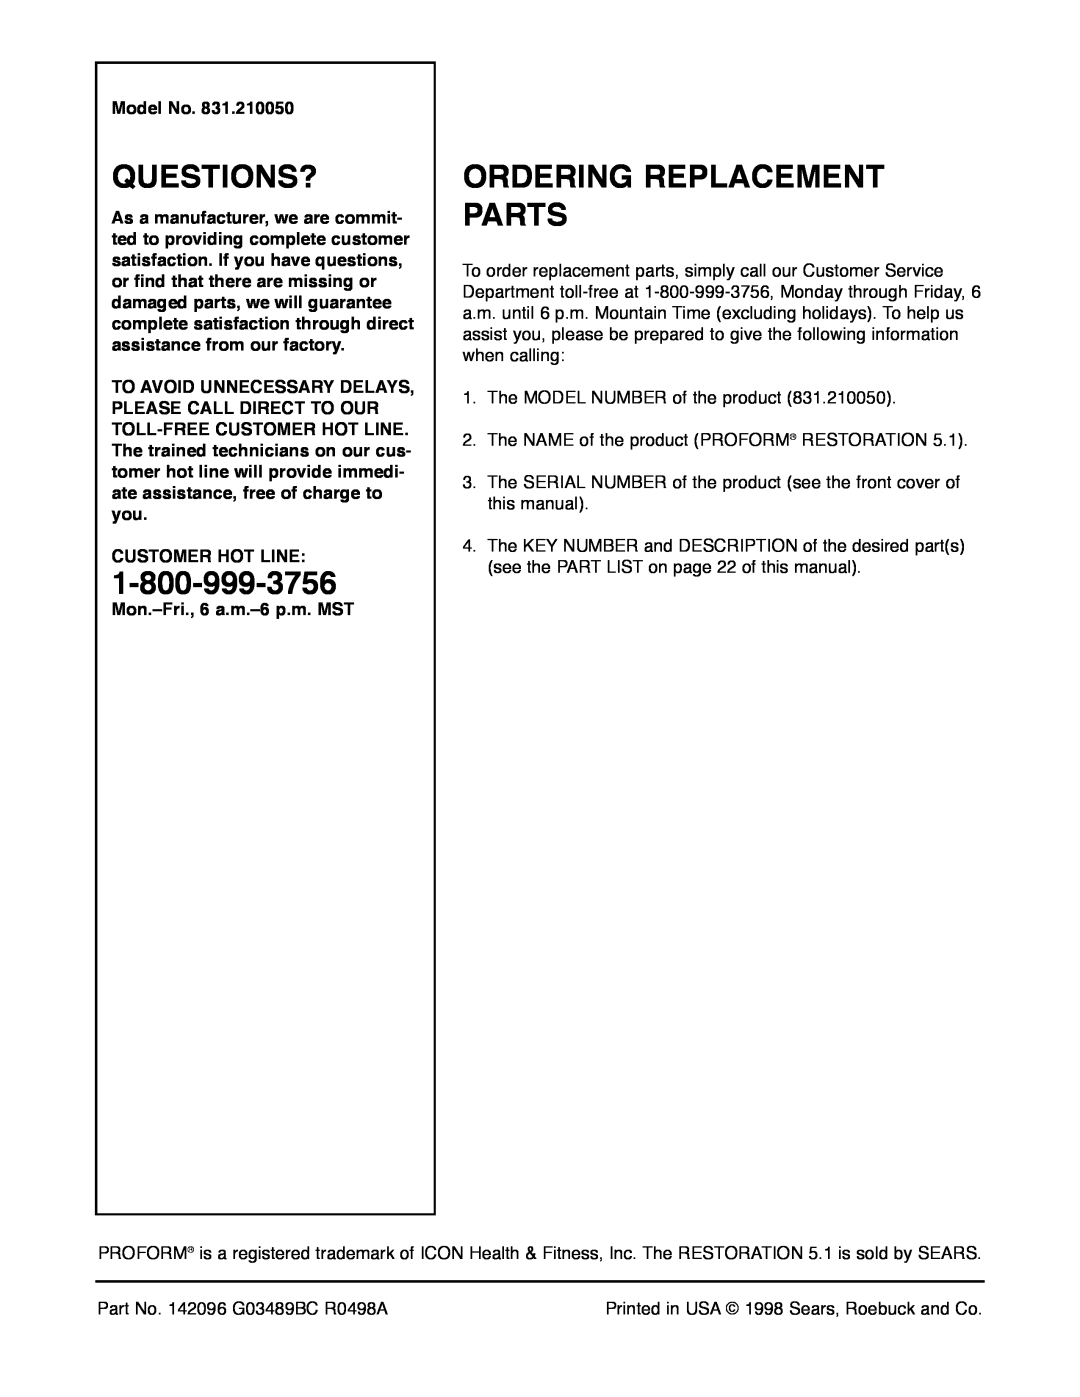 ProForm 831.21005 user manual Ordering Replacement Parts, Questions? 